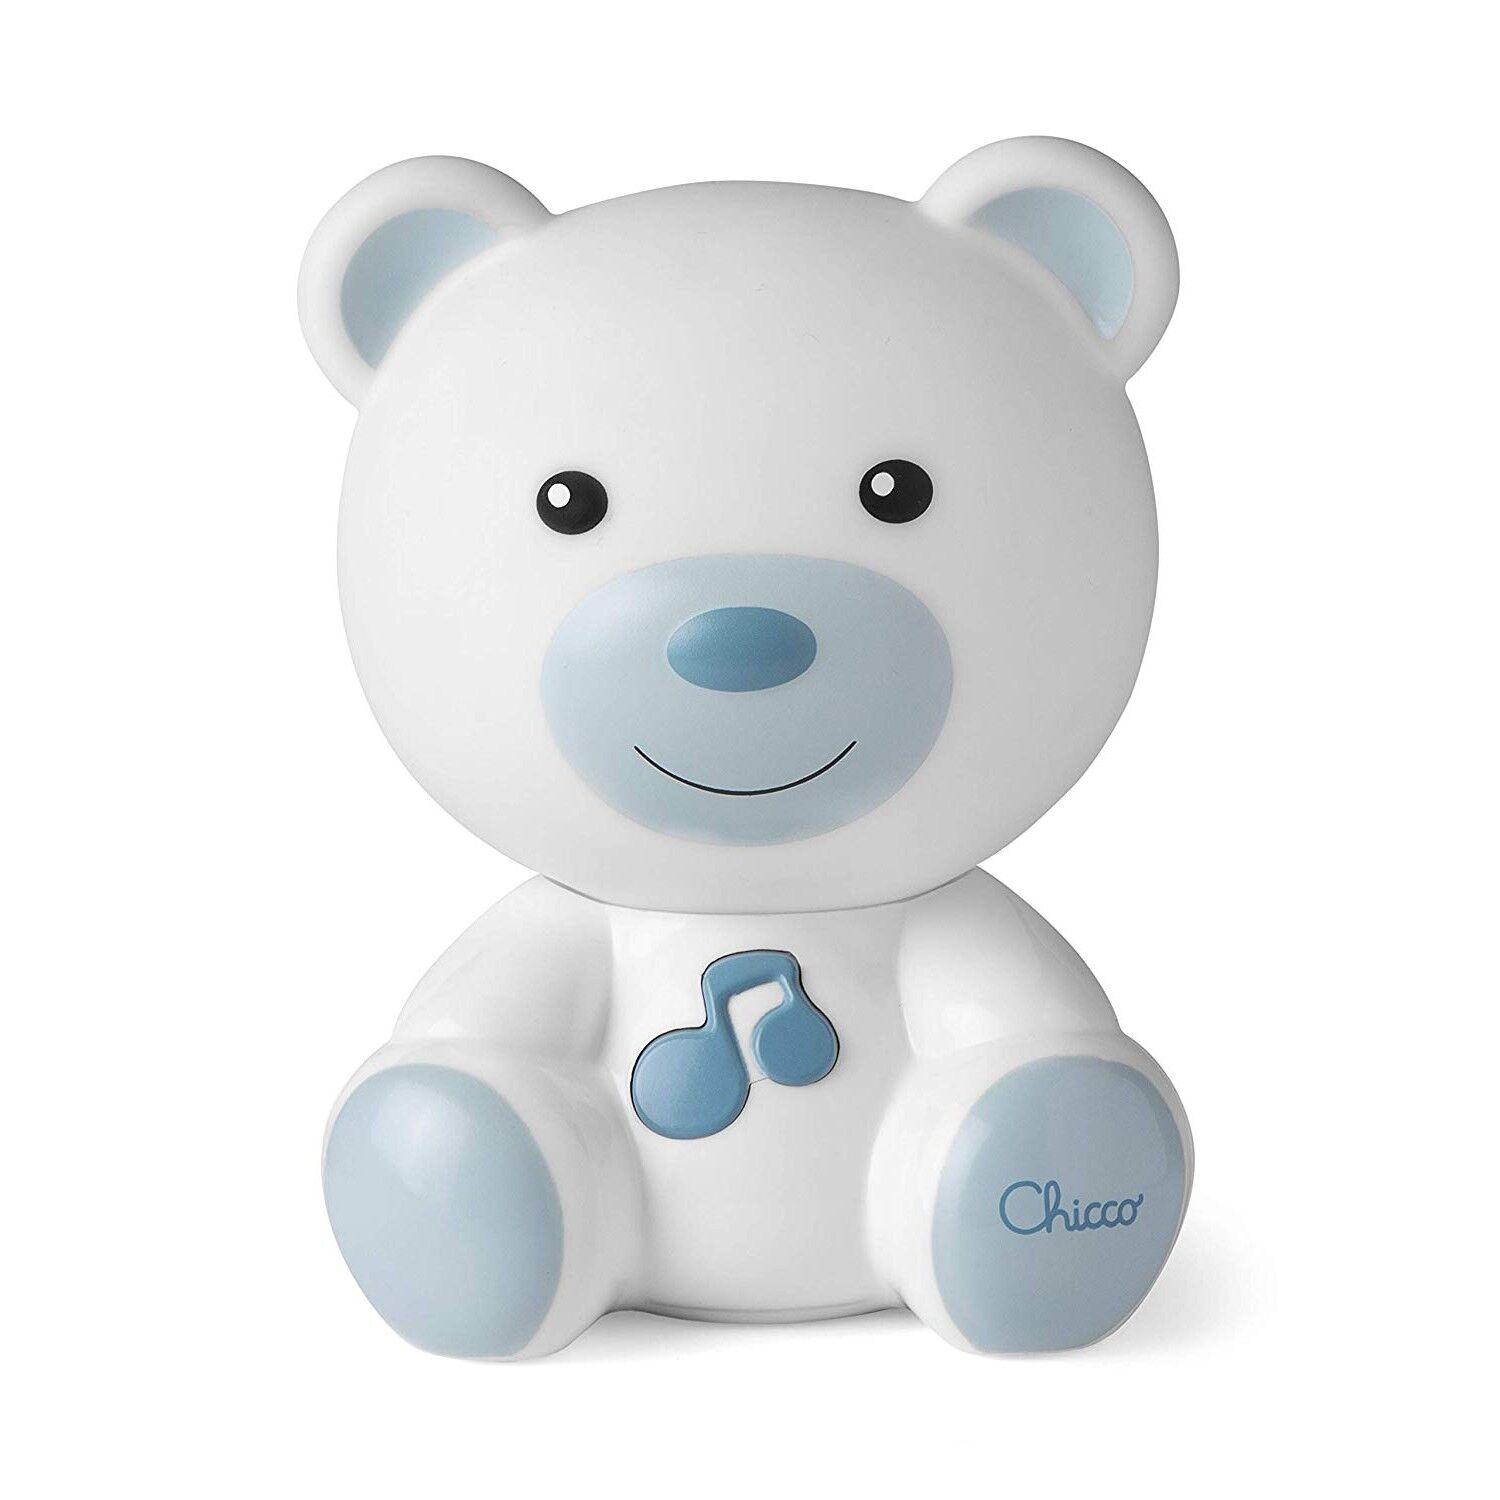 Chicco Luce Notturna Musicale Chicco First Dreams Dreamlight Azzurro